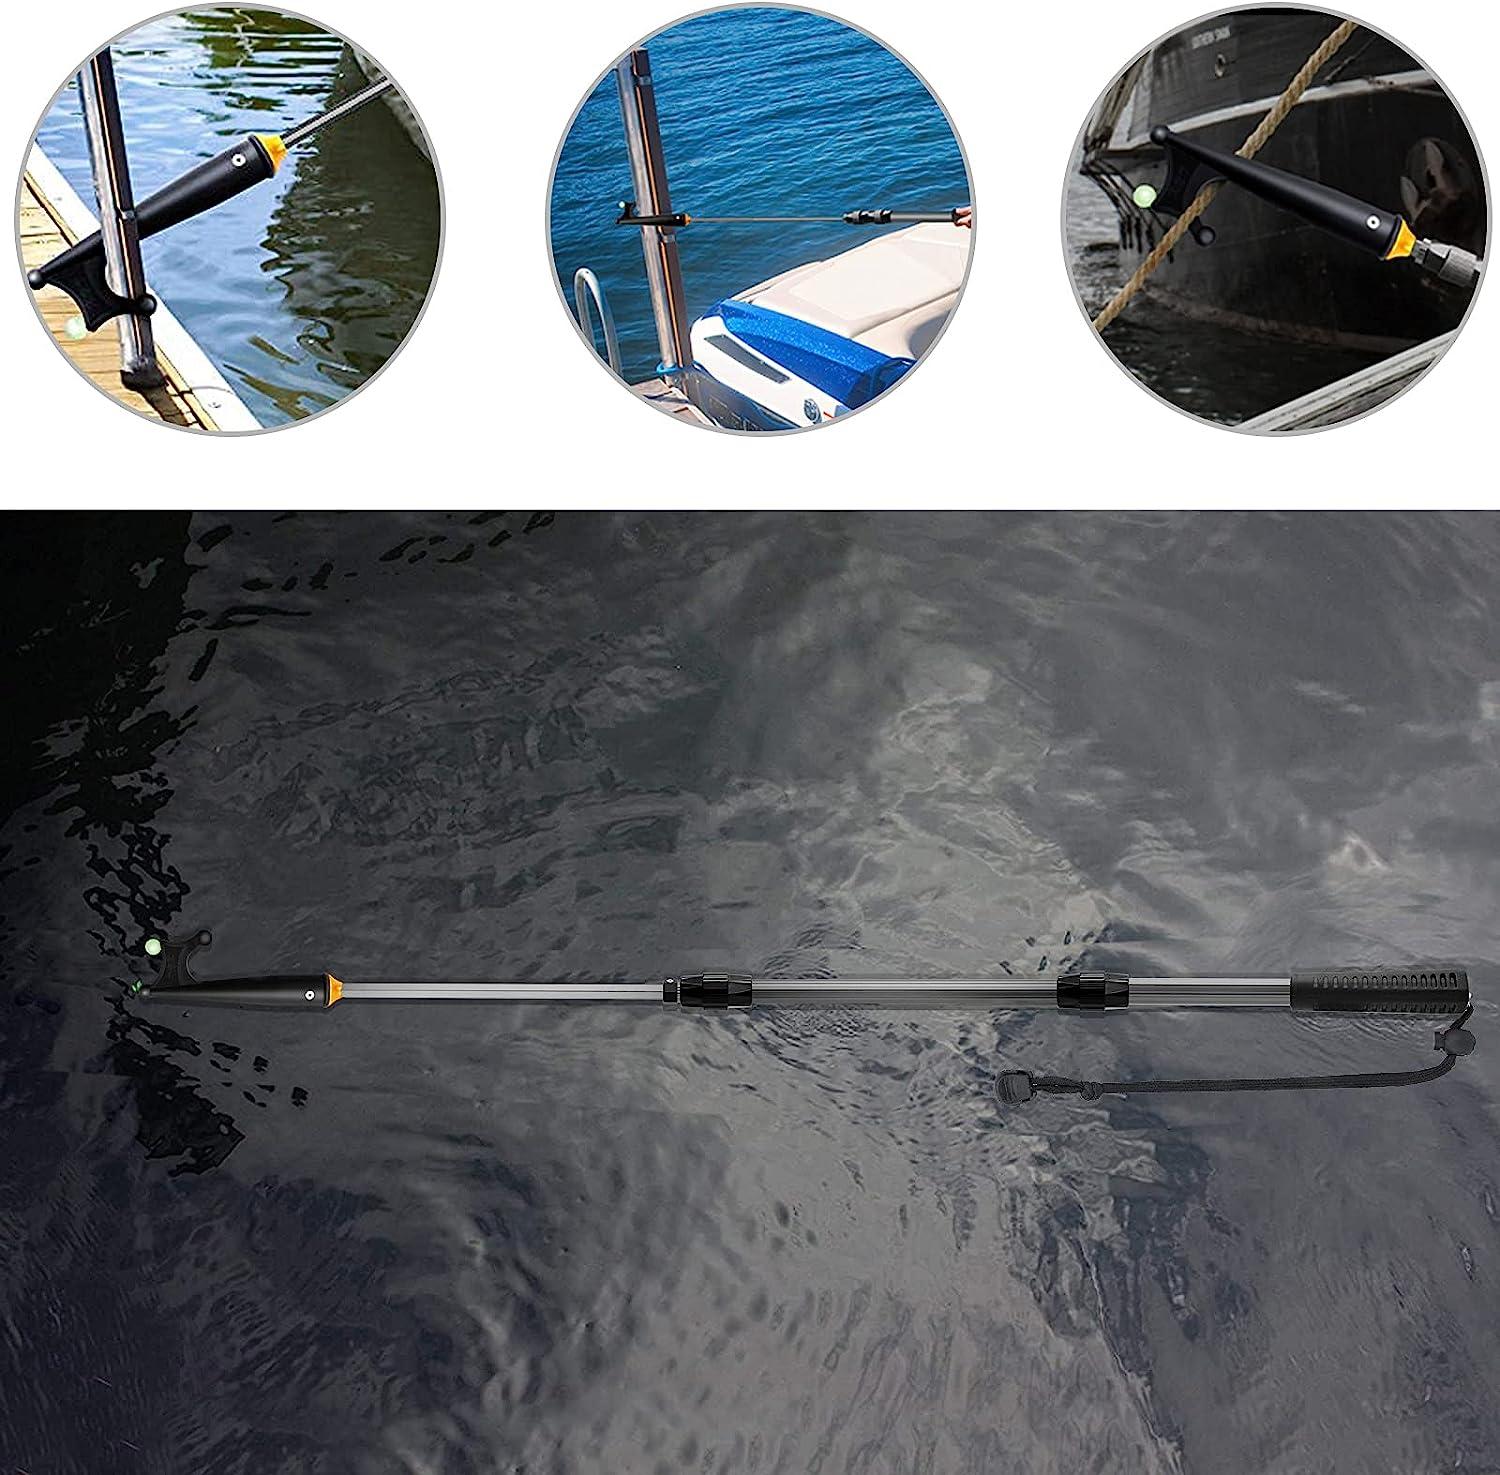 SANLIKE Telescopic Boat Hook,Docking Telescopic Pole,Floating,Durable,Rust-Resistant  with Luminous Bead Boat Hooks Boating Accessories Non-Slip Push Pole for  Docking 55 in Telescopic Boat Hooks